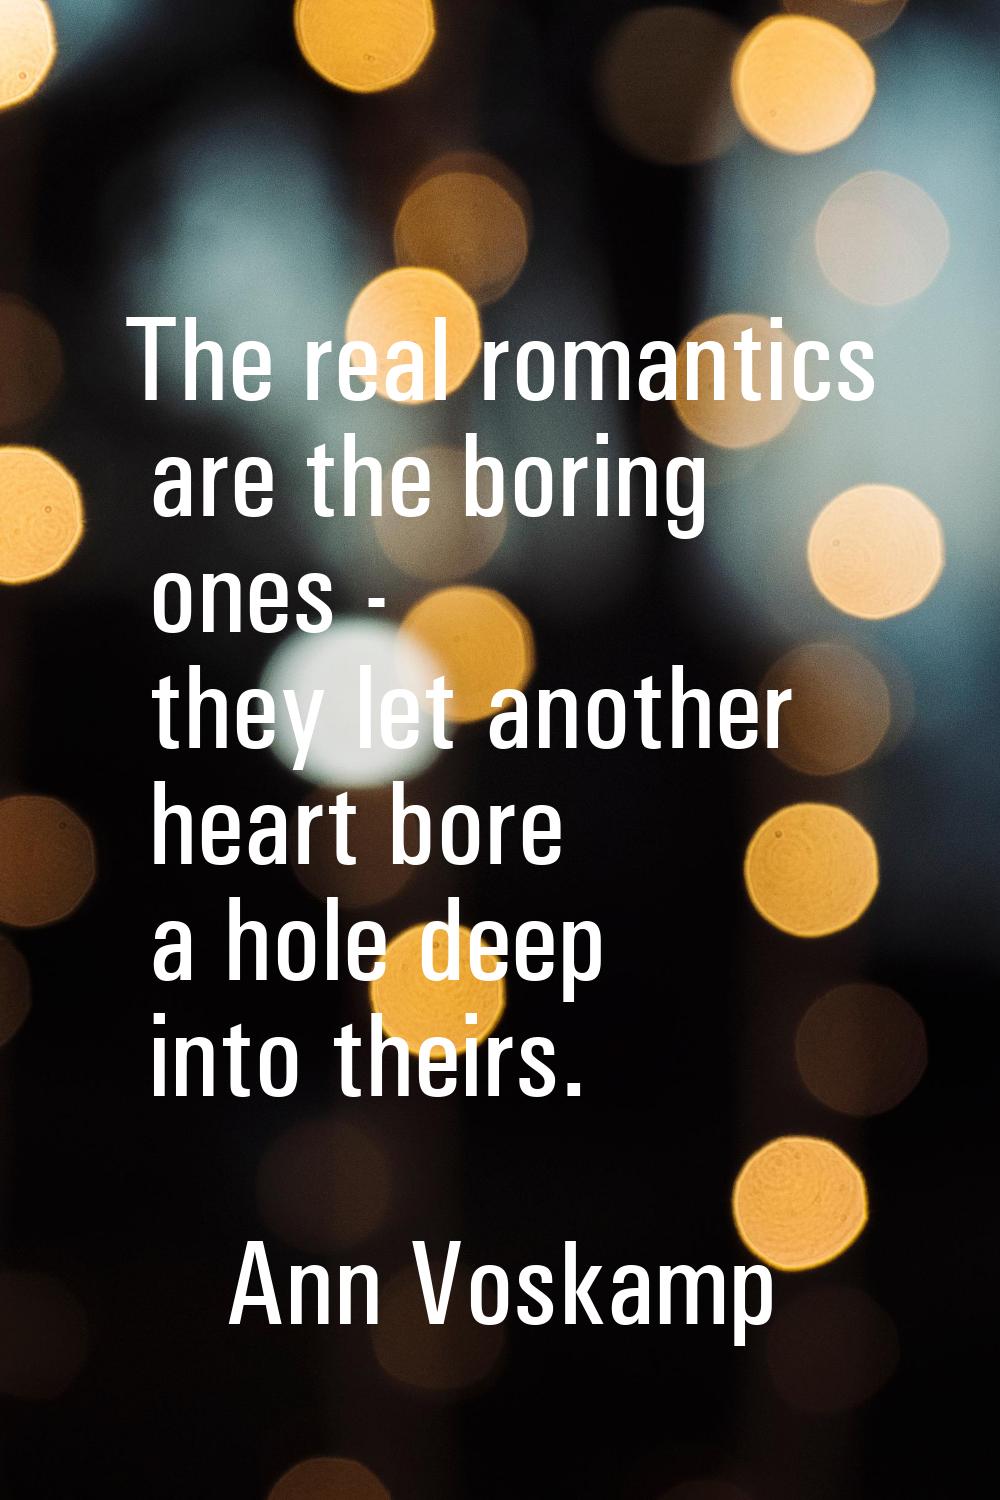 The real romantics are the boring ones - they let another heart bore a hole deep into theirs.